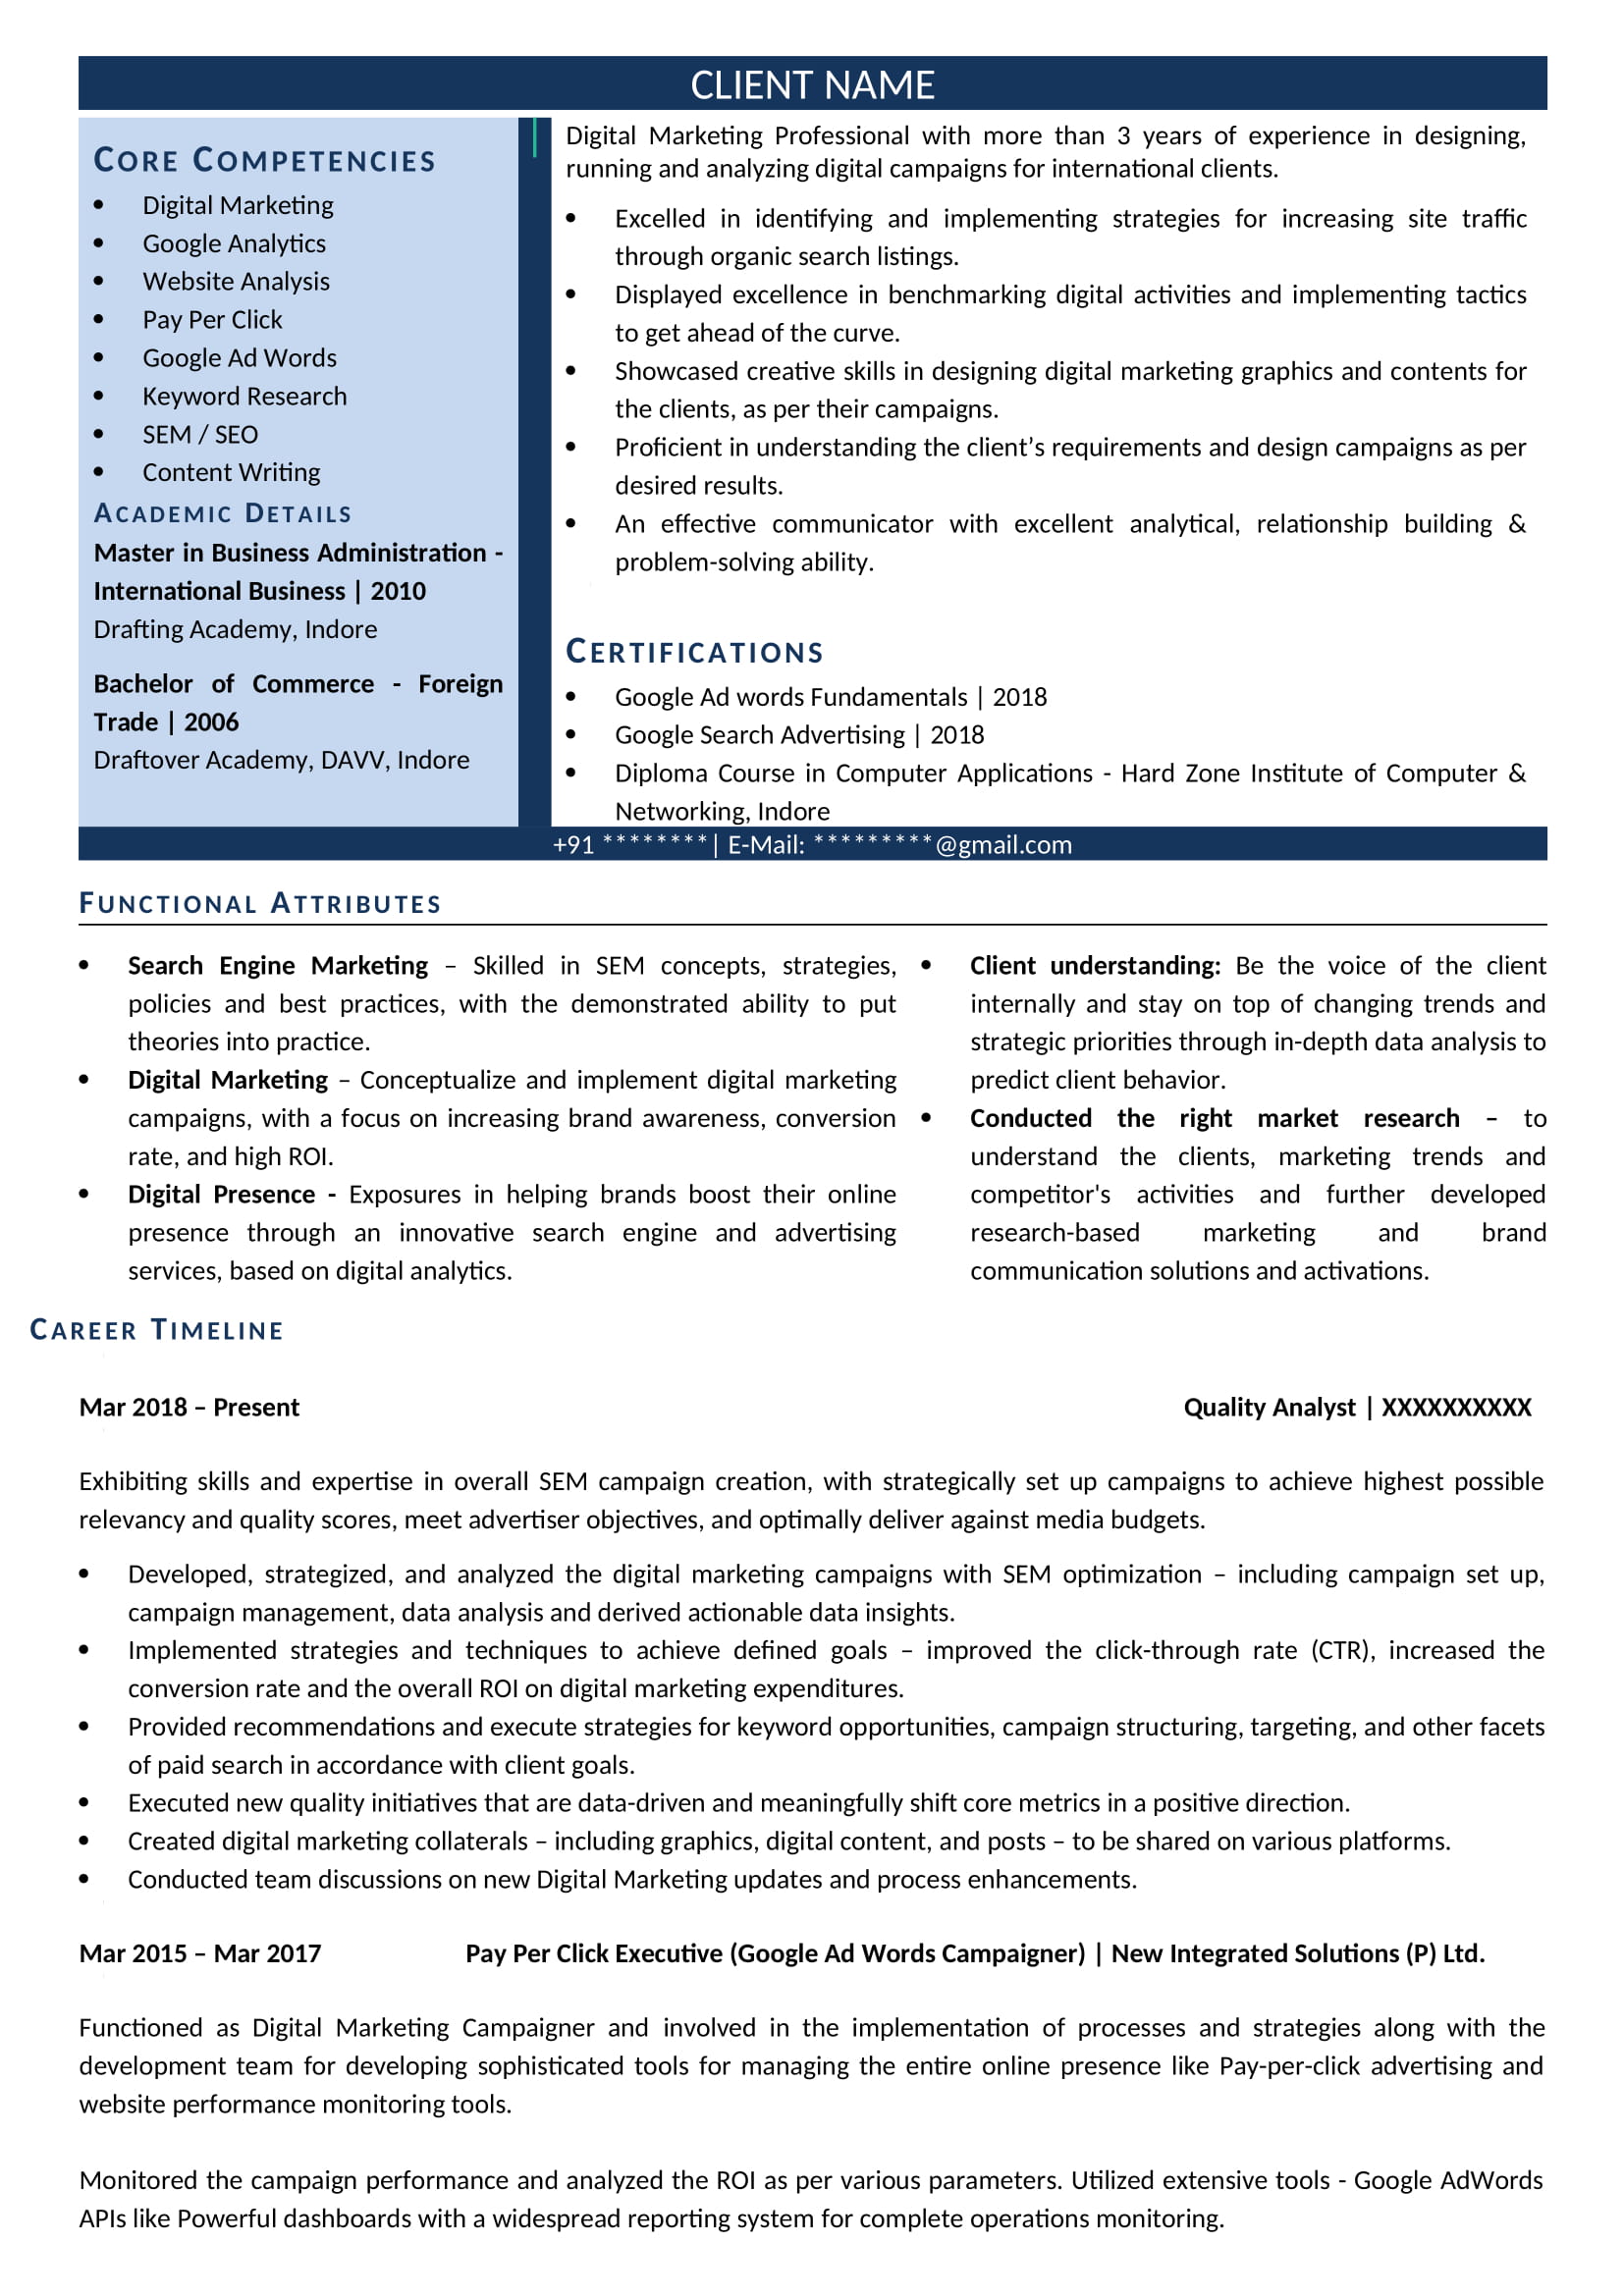 Text-Resume-format-for-Entry-Level-Digital-Marketing-Profile 